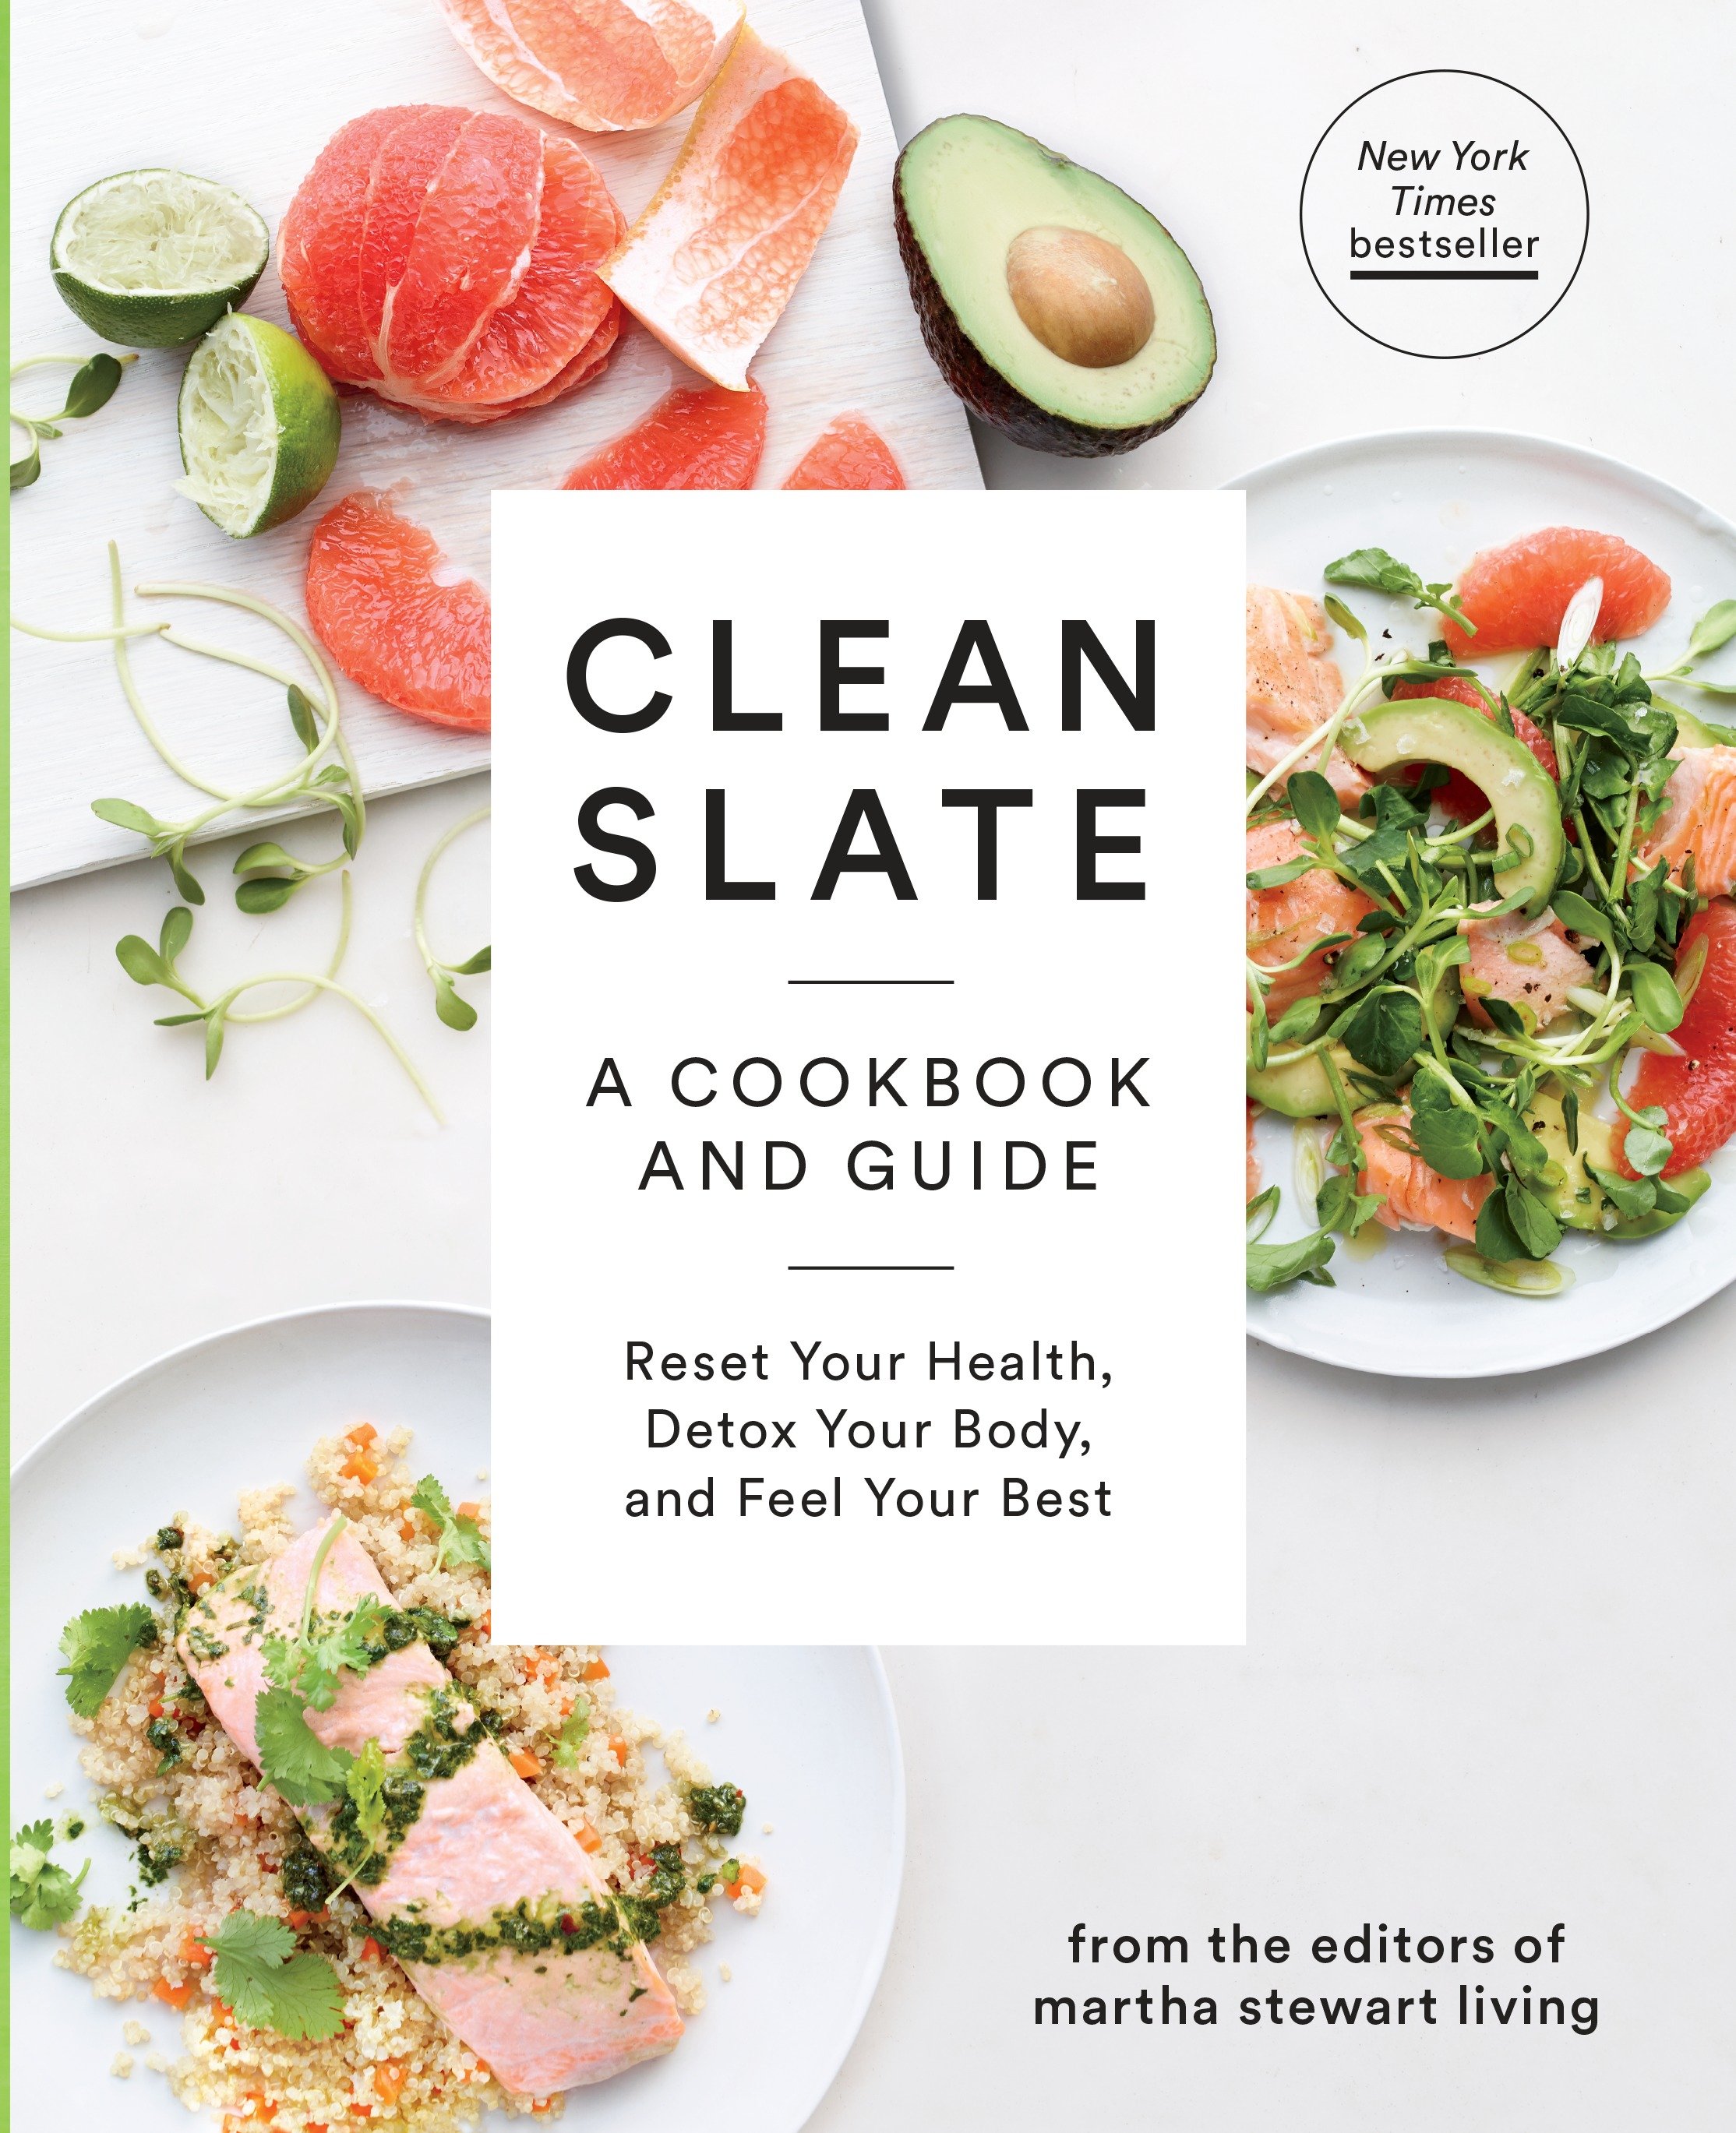 Clean slate a cookbook and guide: reset your health, detox your body, and feel your best cover image